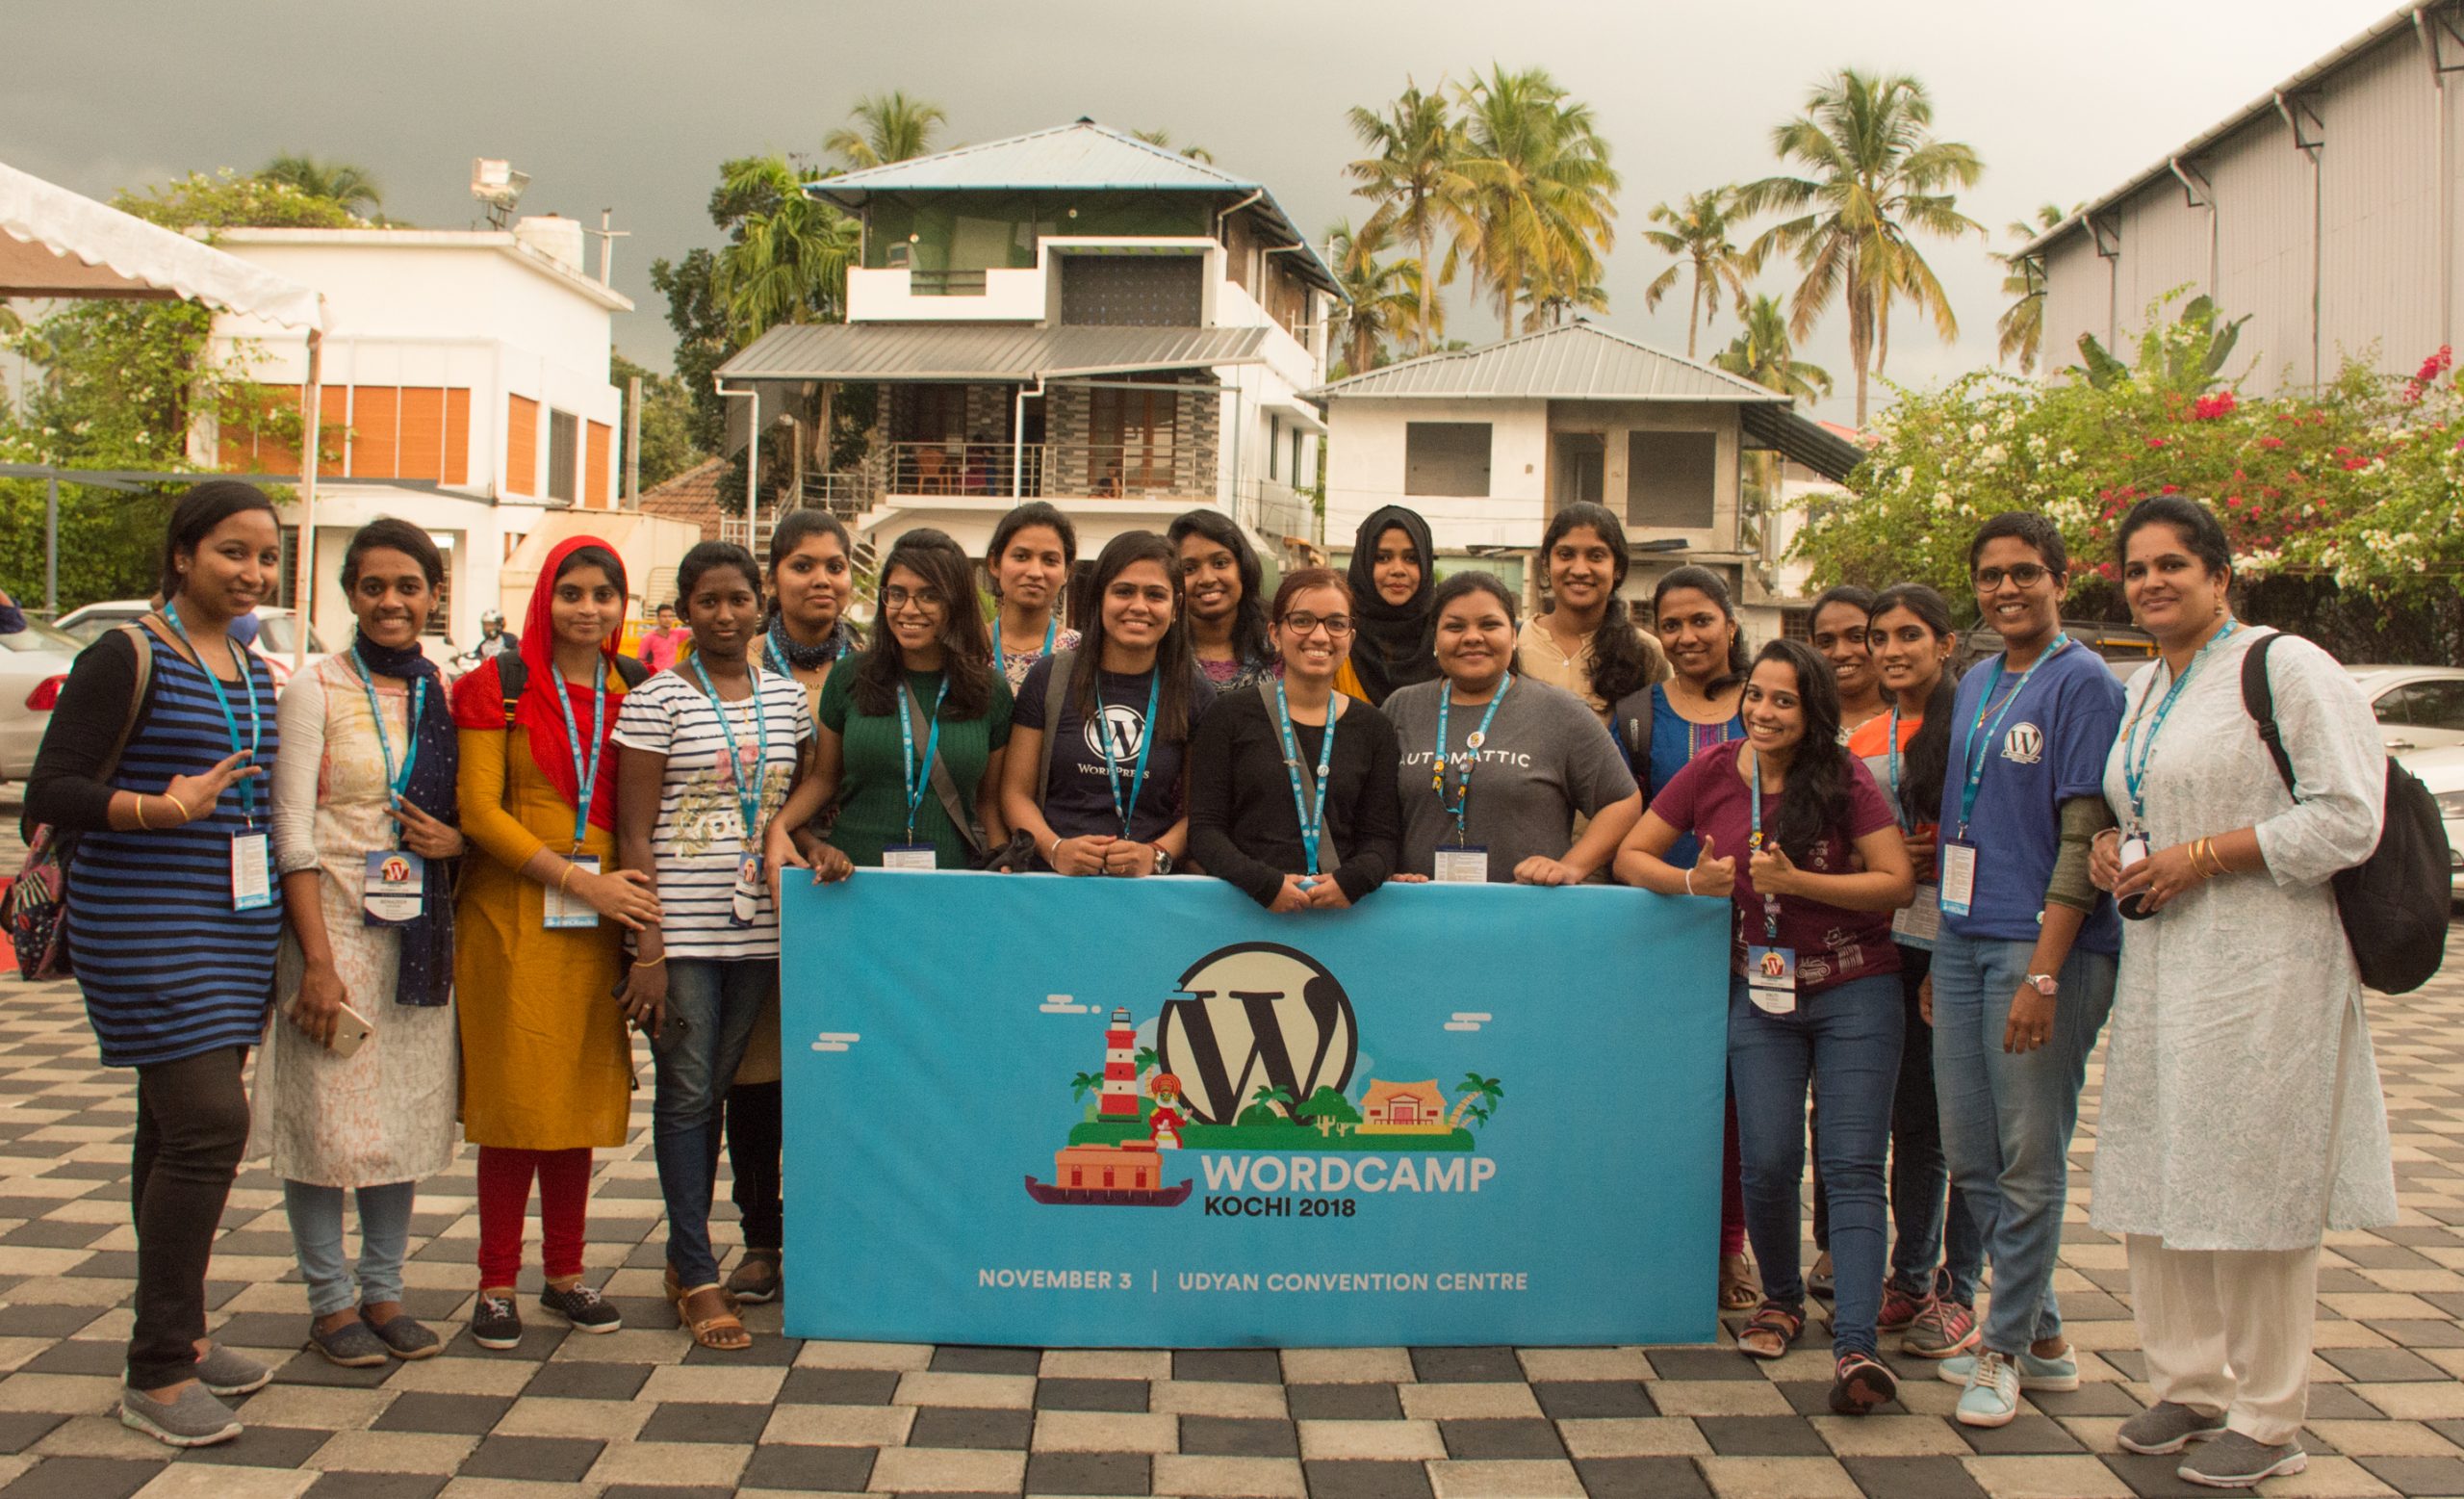 10 Reasons Why You Should Attend A WordCamp